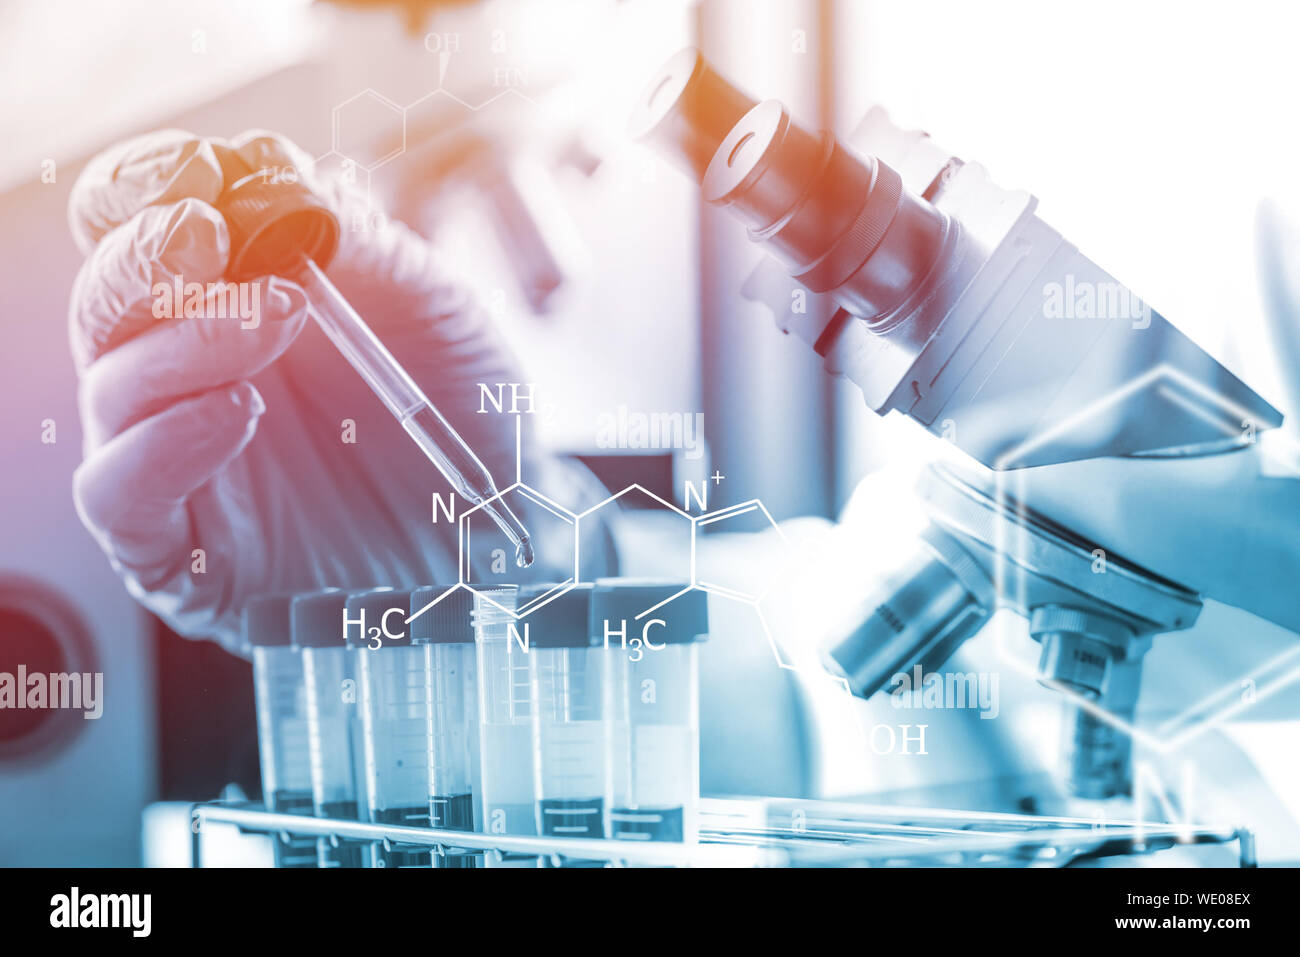 Digital Composite Image Of Scientist Experimenting In Laboratory And Icons Stock Photo